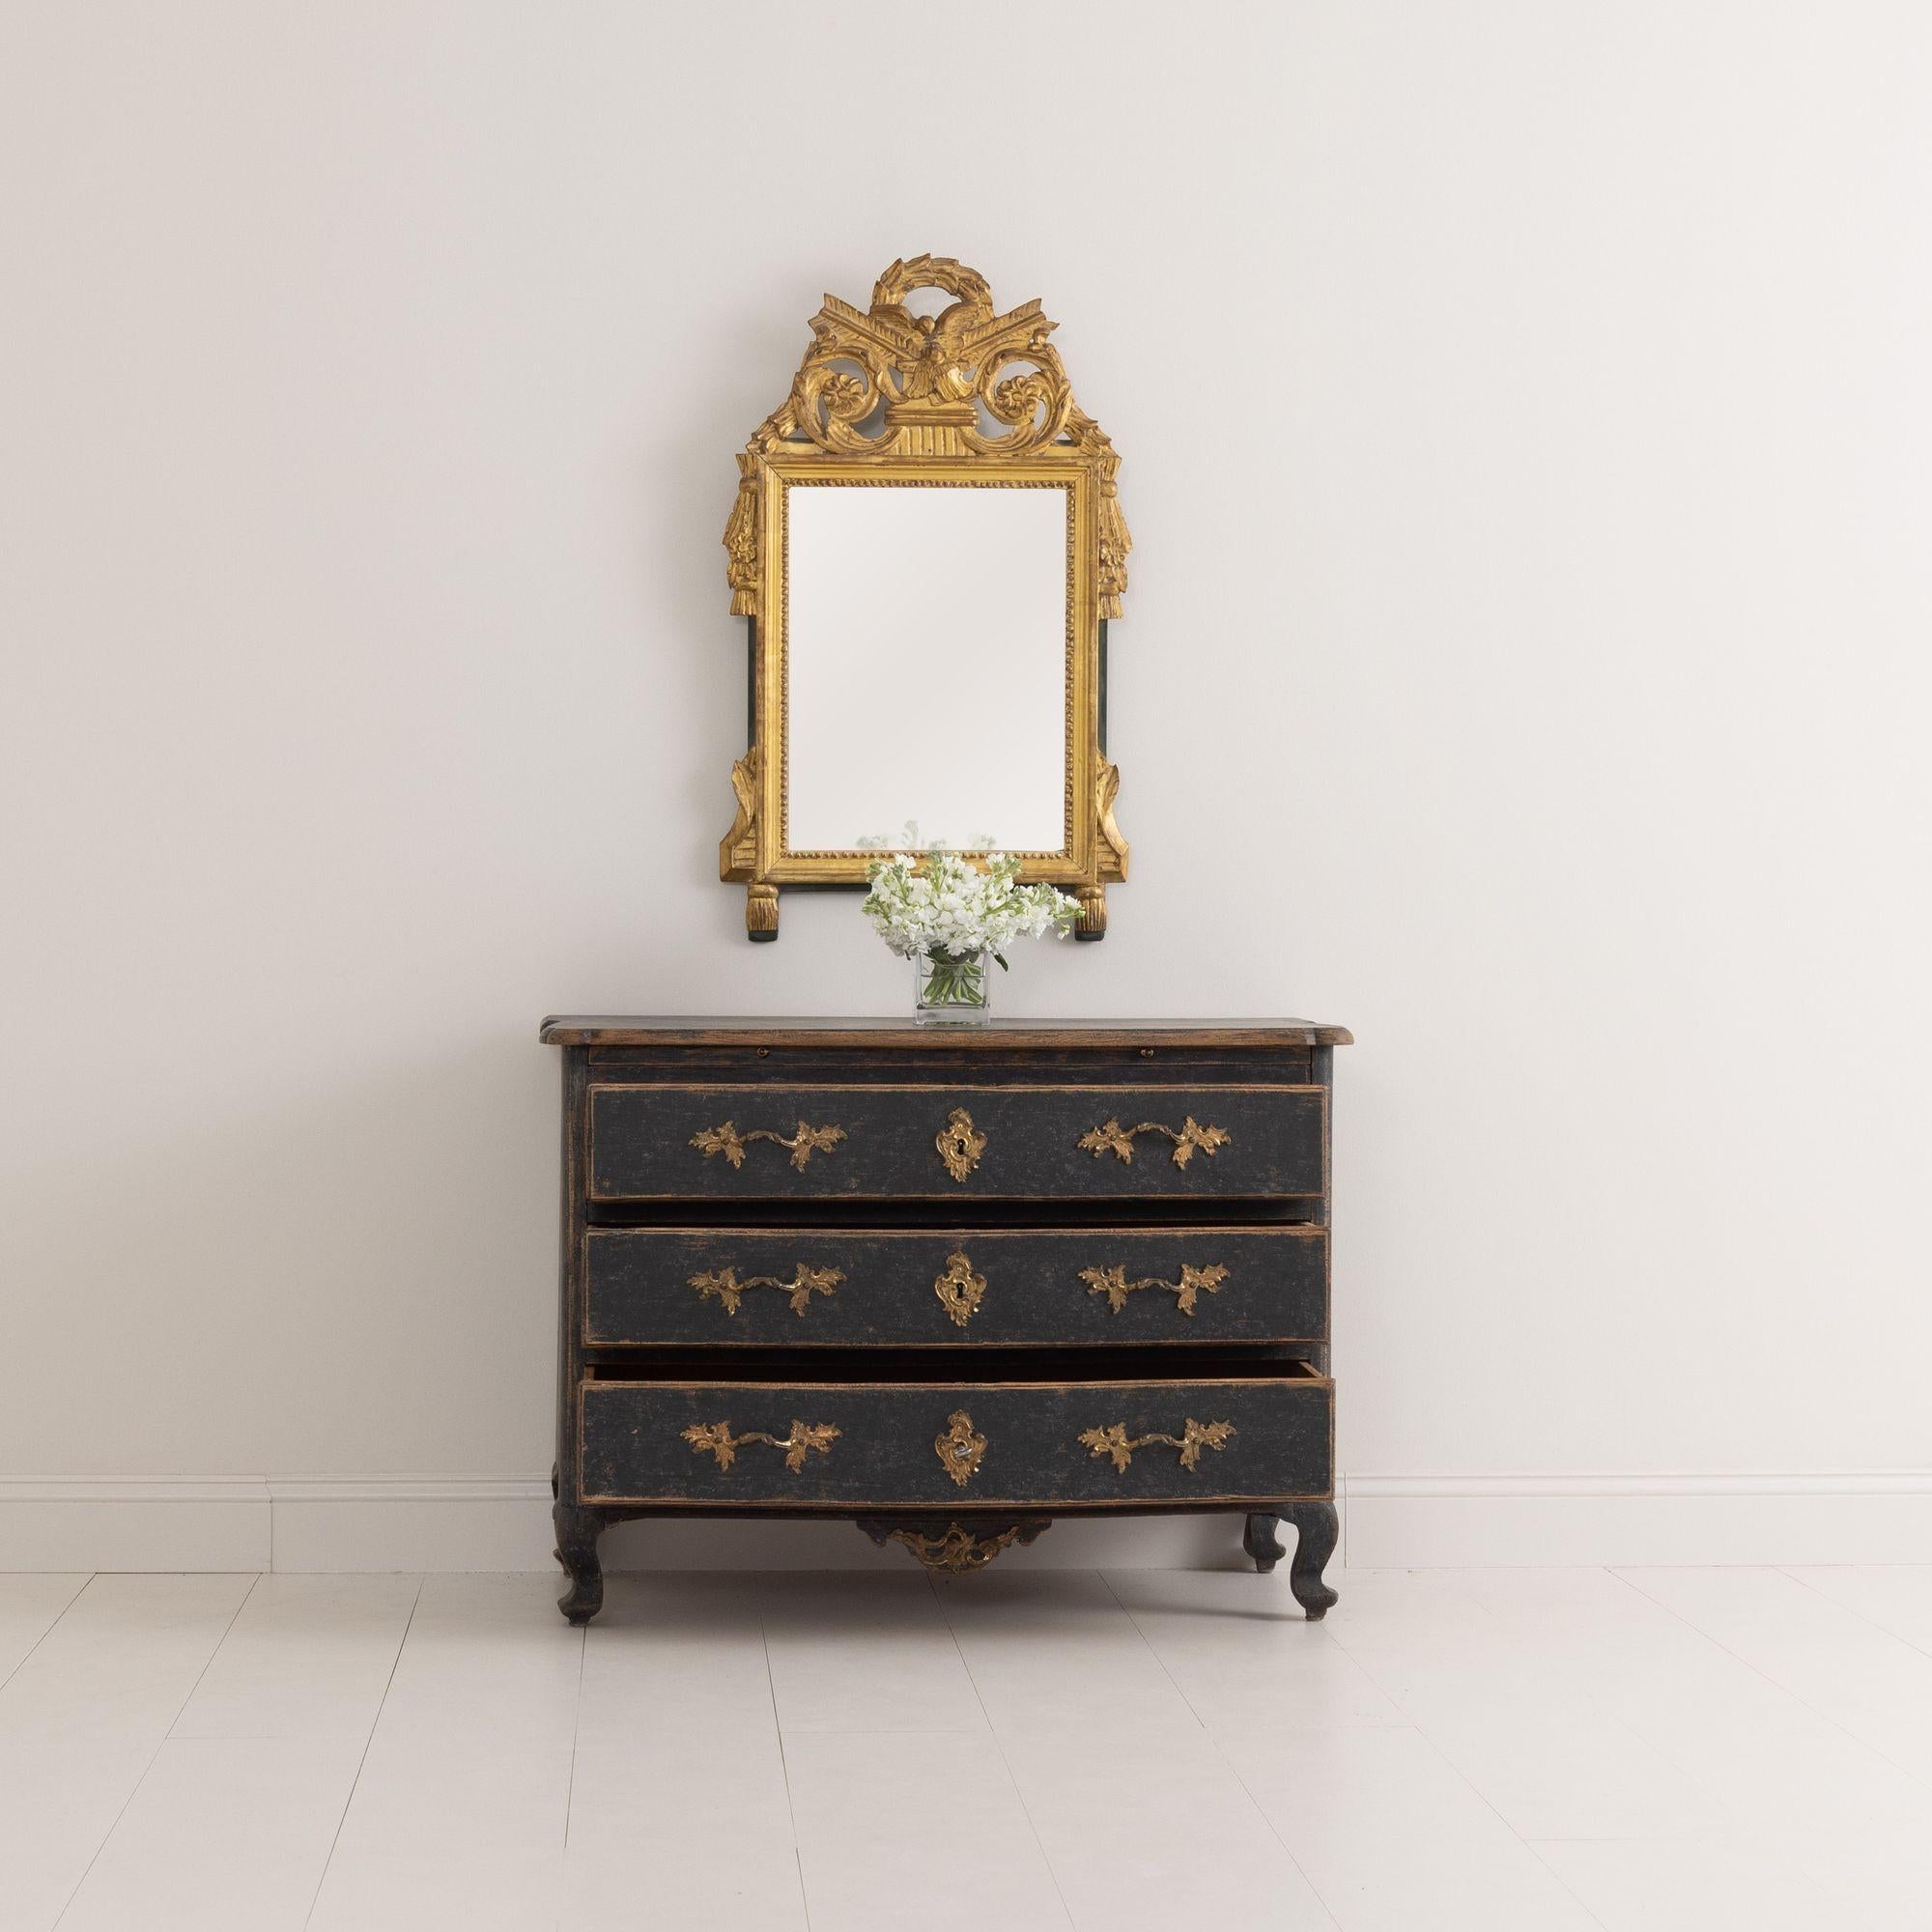 18th Century and Earlier 18th C. Swedish Rococo Period Black Painted Commode with Original Brass Hardware For Sale